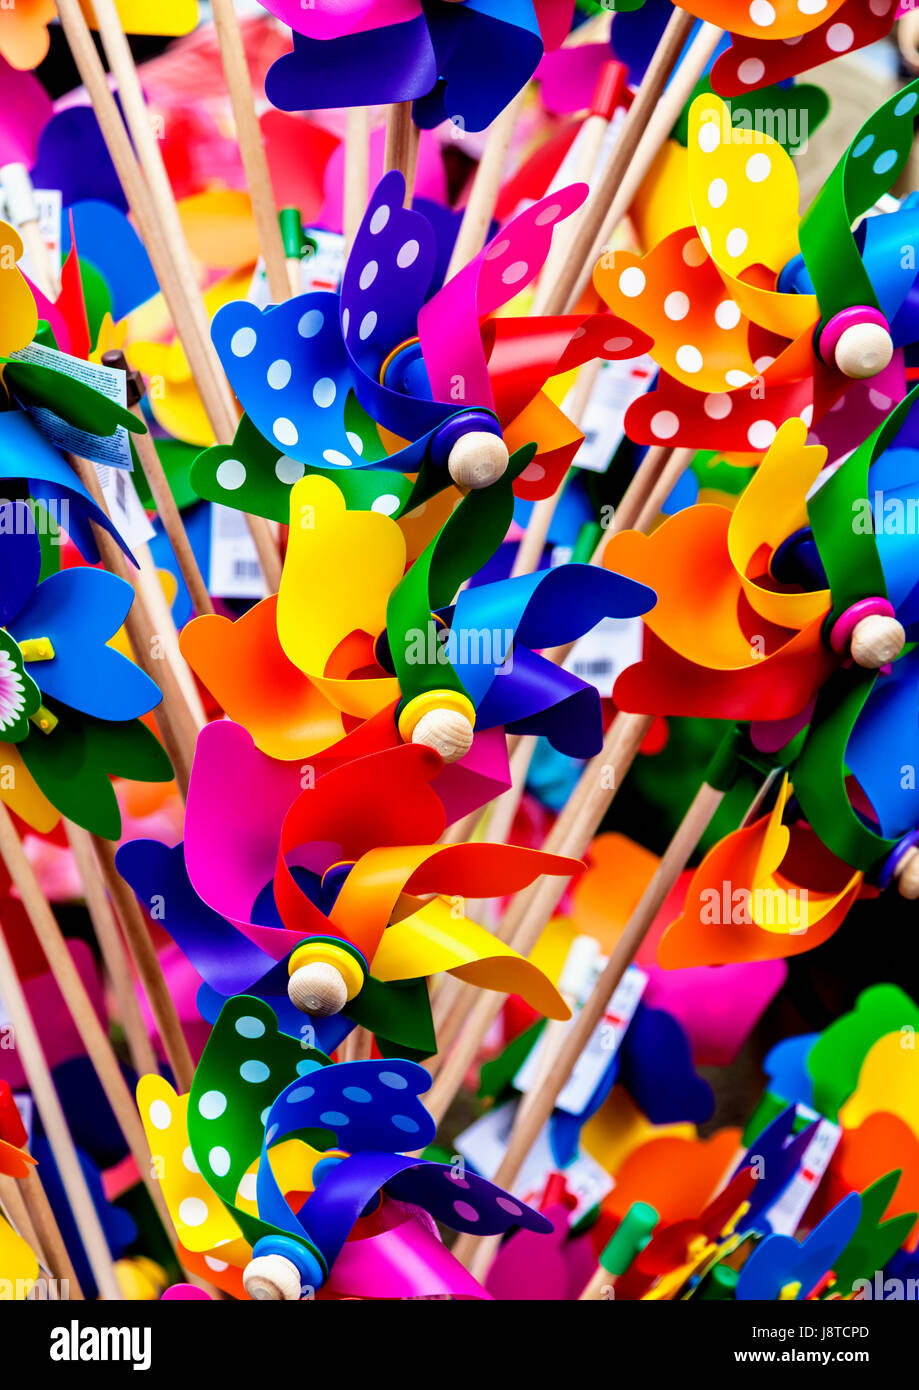 Colourful plastic windmills on sale at open air market Stock Photo